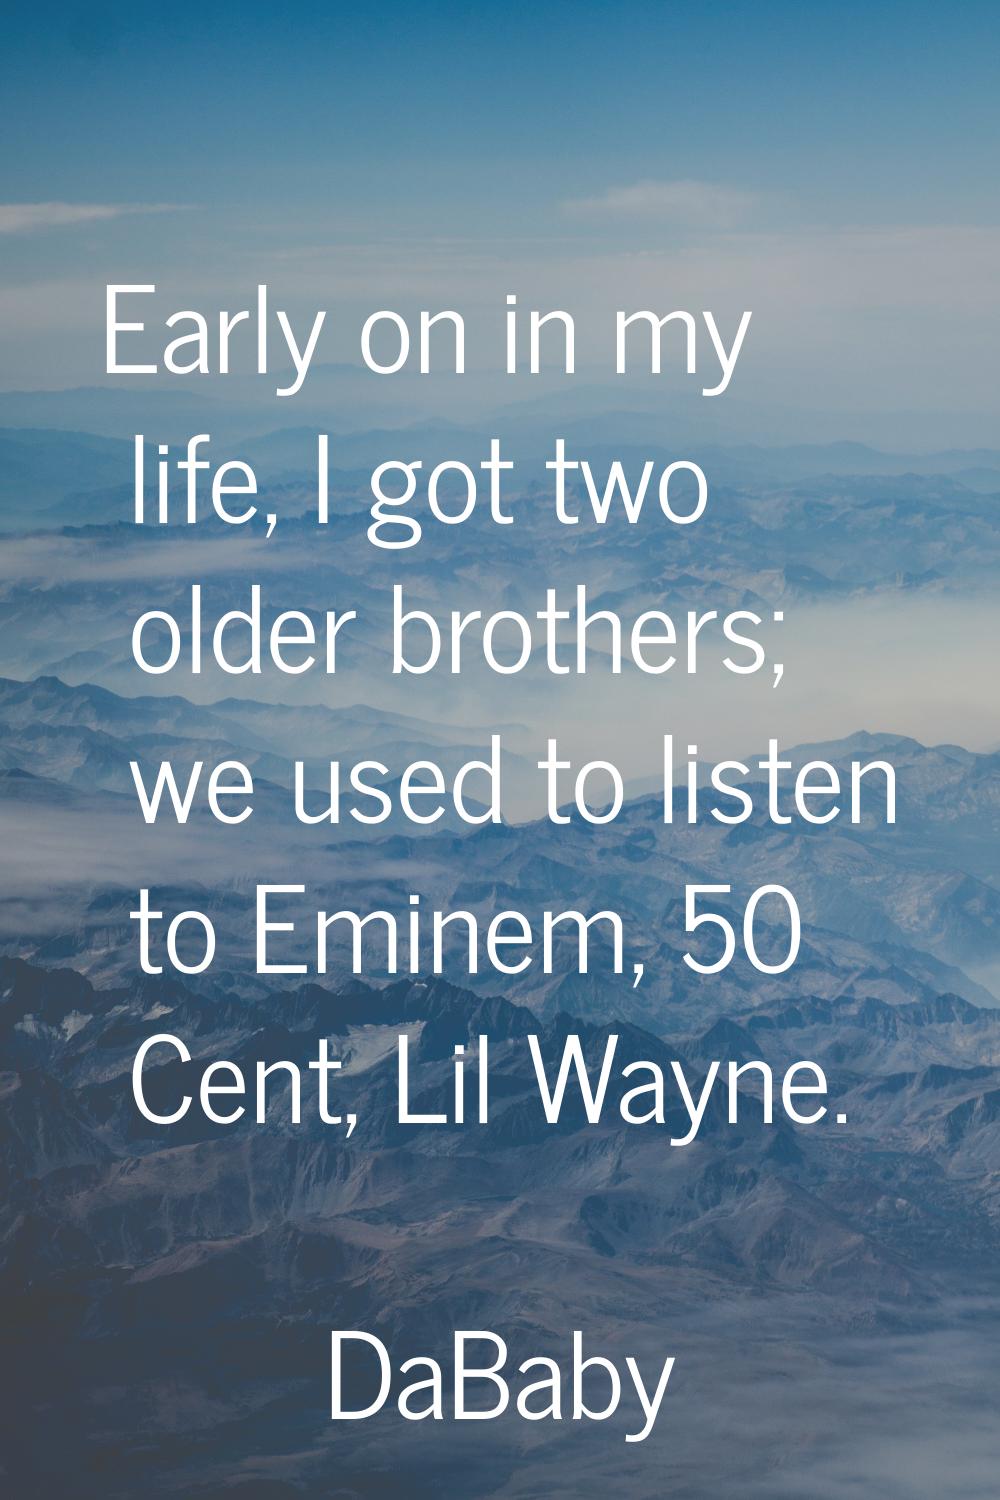 Early on in my life, I got two older brothers; we used to listen to Eminem, 50 Cent, Lil Wayne.